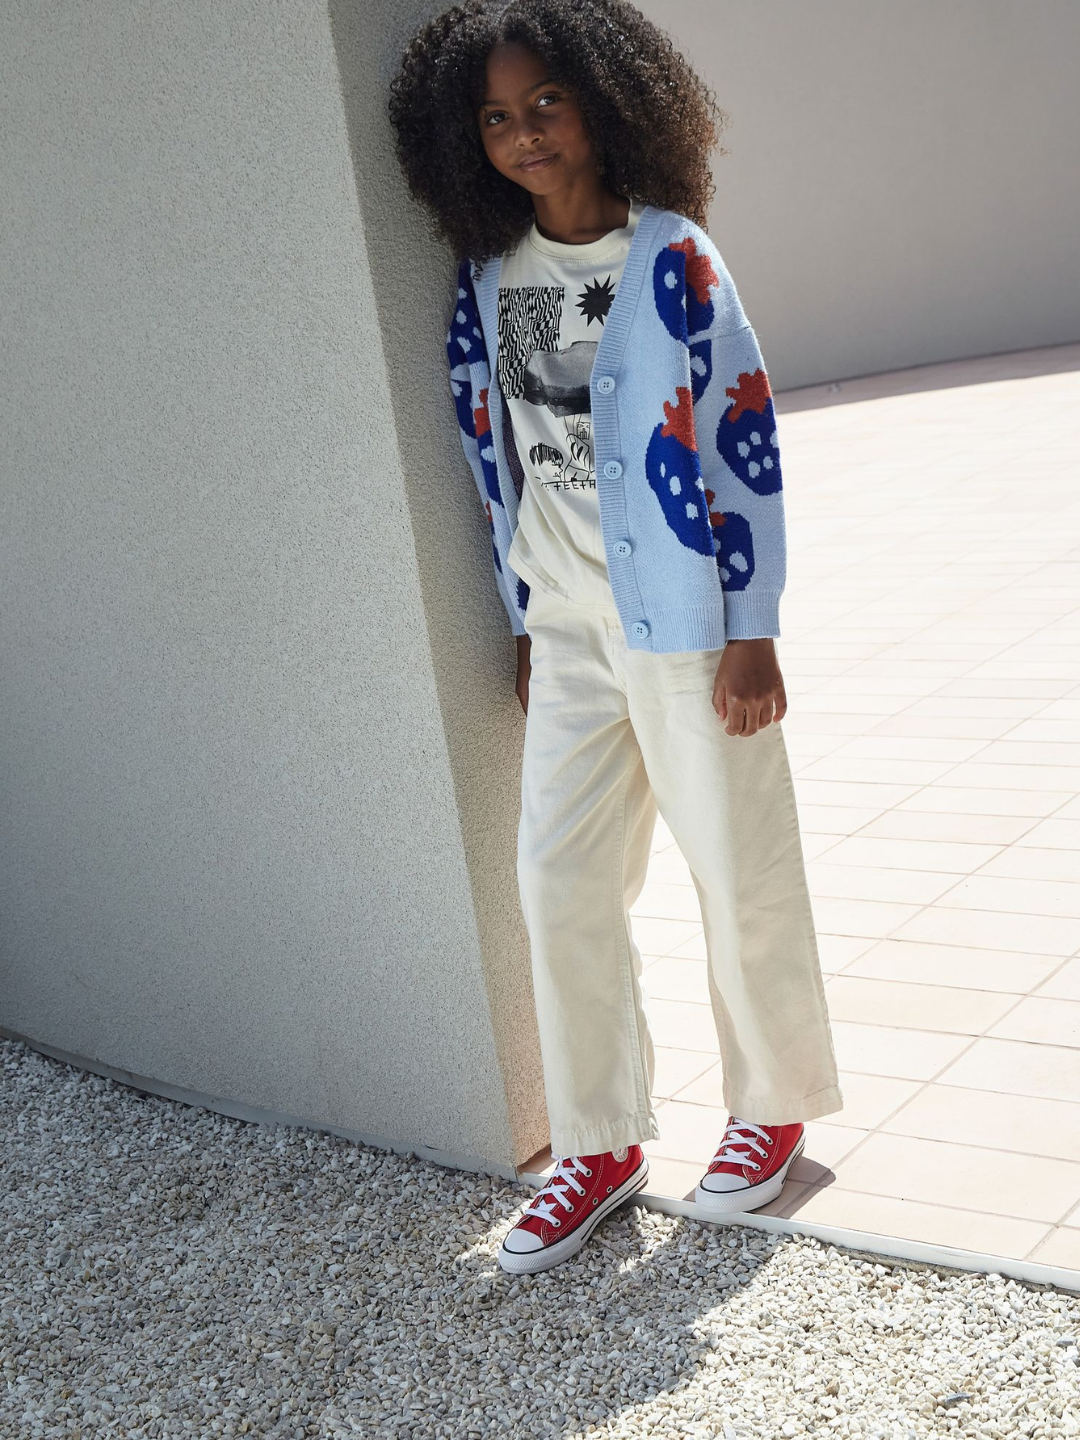 Sky | A girl wearing a kids v-neck cardigan in light blue with an all-over pattern of large blue strawberries with a red leaf. She is leaning against a concrete wall in a paved outdoor space with gravel, and wearing a white t-shirt with a black graphic, white jeans, and red hi-top sneakers.